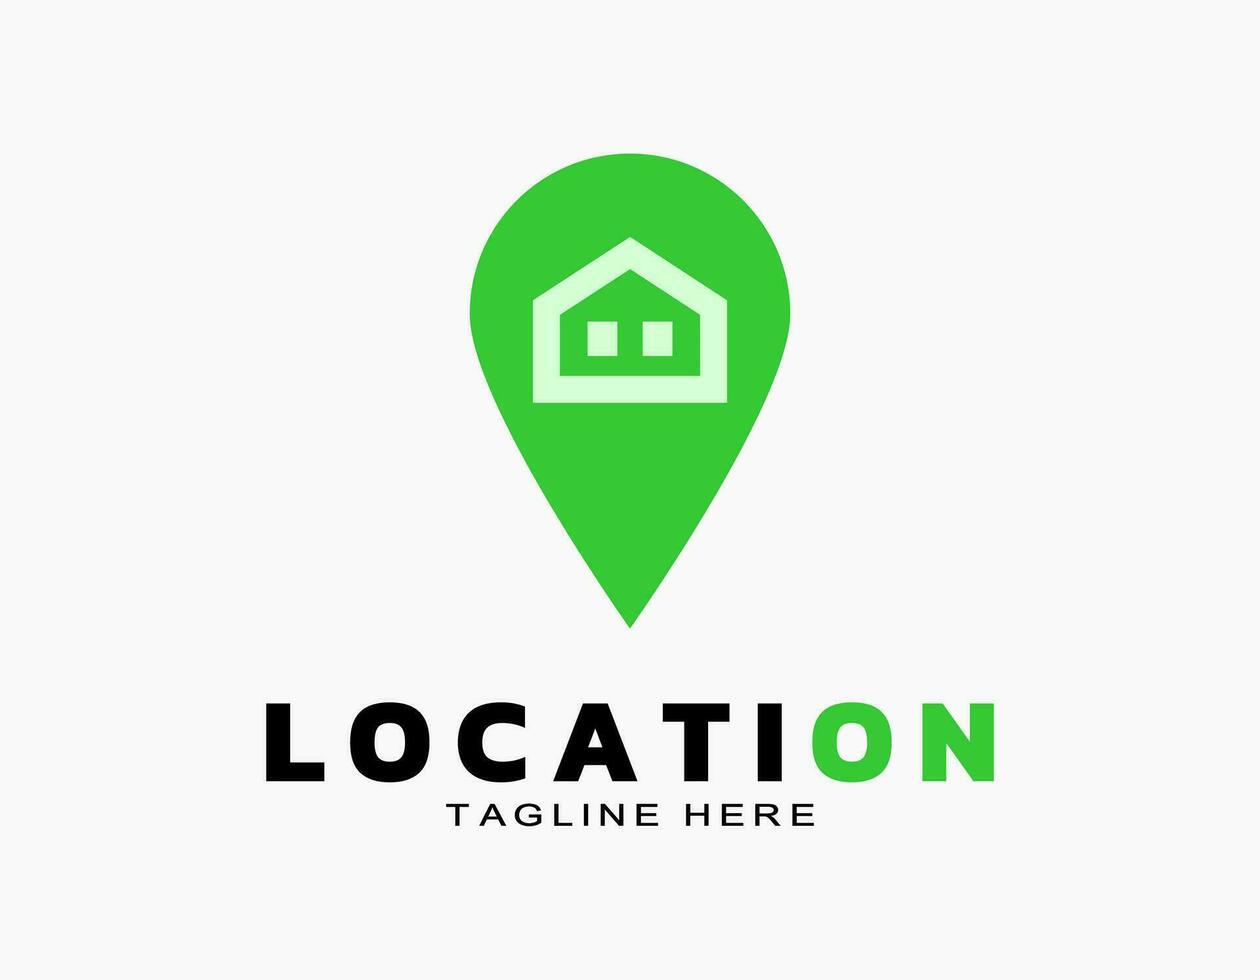 Home location logo in green. Real estate in a strategic point. Good and strategic property development for business or residence. vector